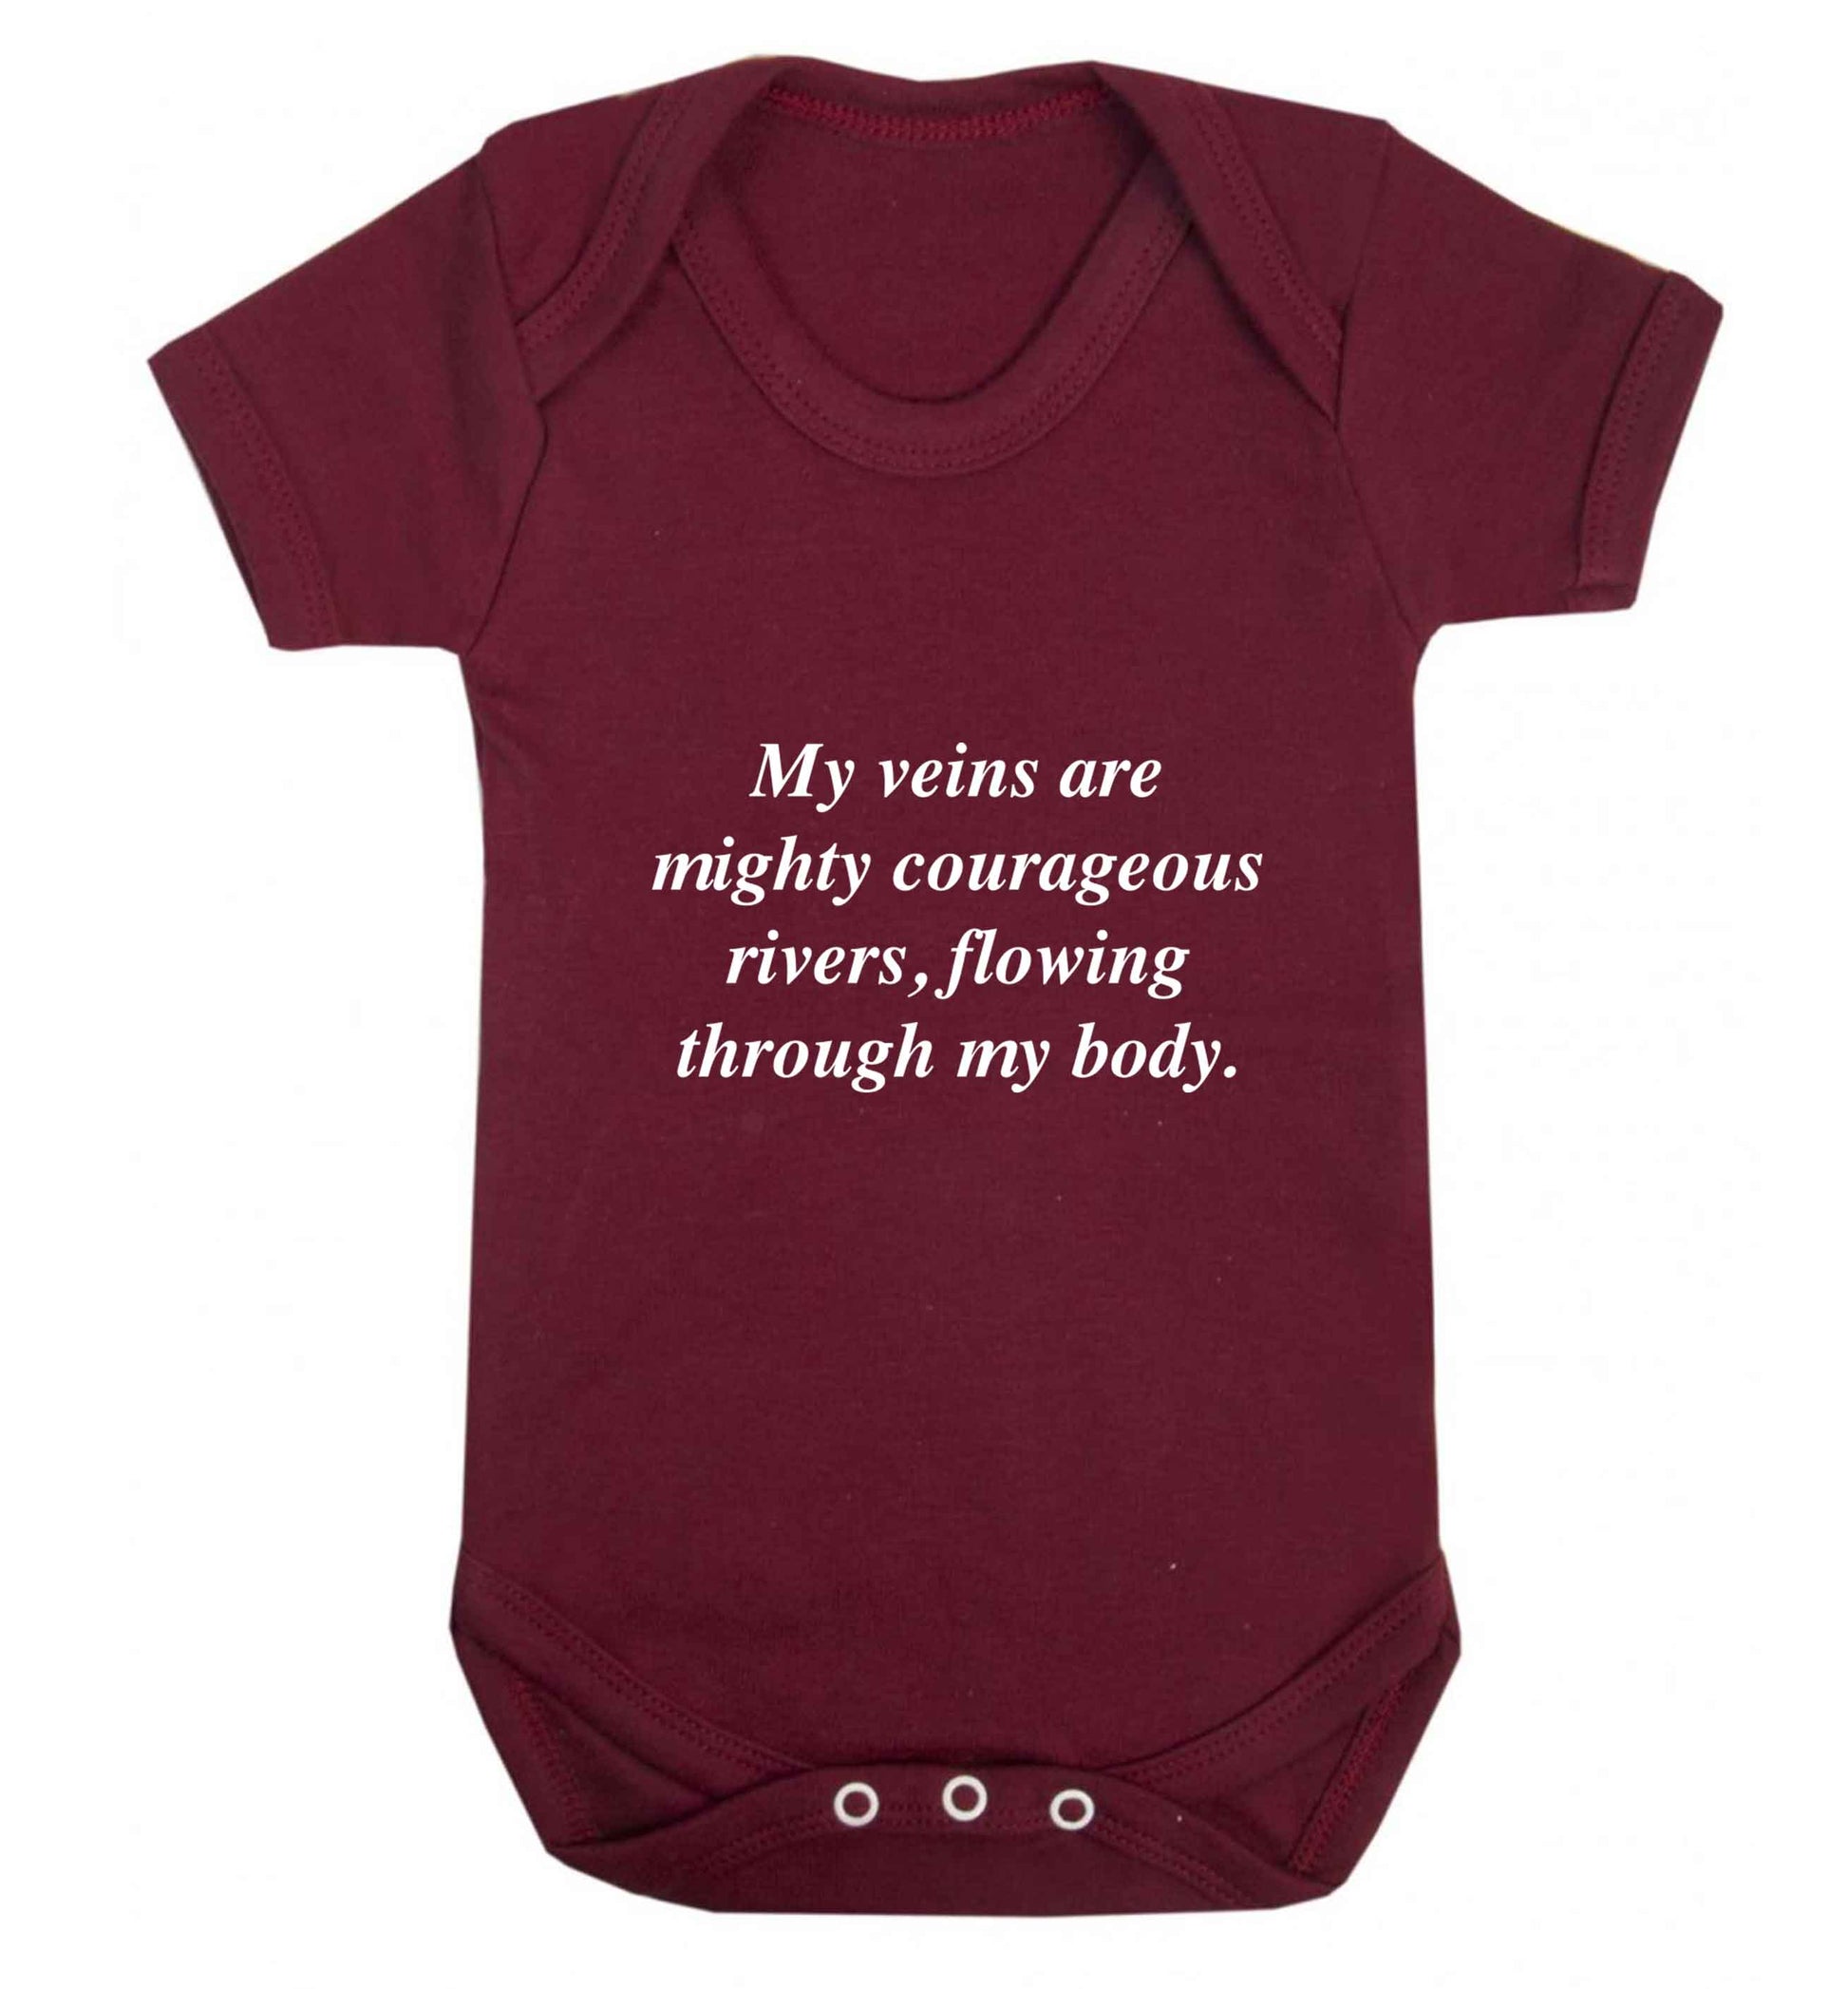 My veins are mighty courageous rivers, flowing through my body baby vest maroon 18-24 months